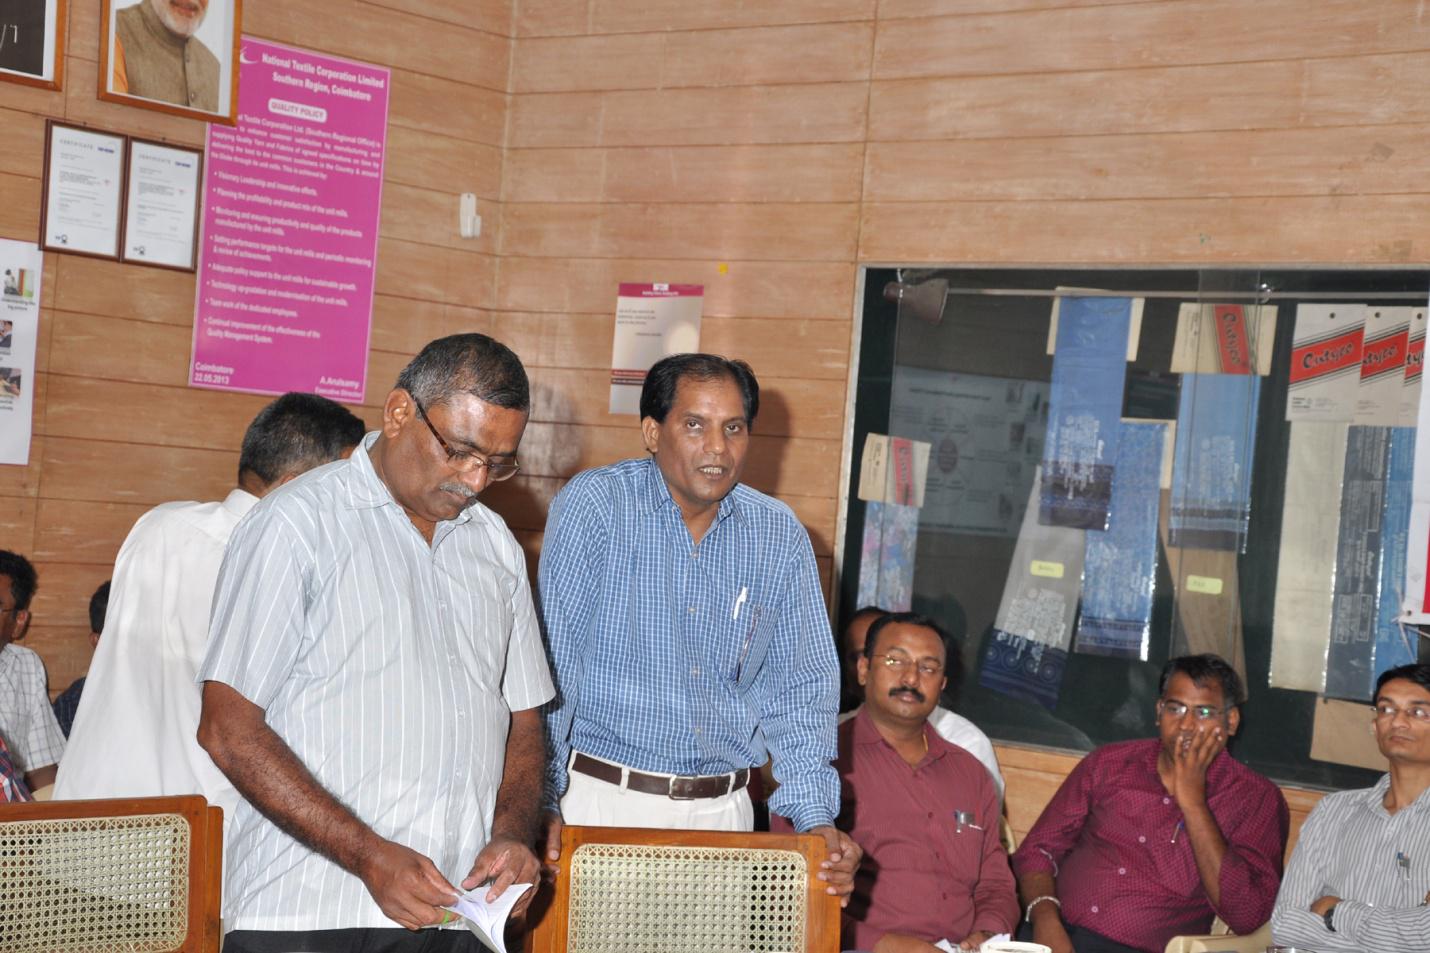 Shri Pawan Kumar Pandey, Senior Stenographer (Hindi) giving vote of thanks for all Officers and Employees of S R O on the occasion of Hindi Fortnight Prize Distribution Function held on 26.09.2016 at NTC Ltd., Southern Regional Office, Coimbatore